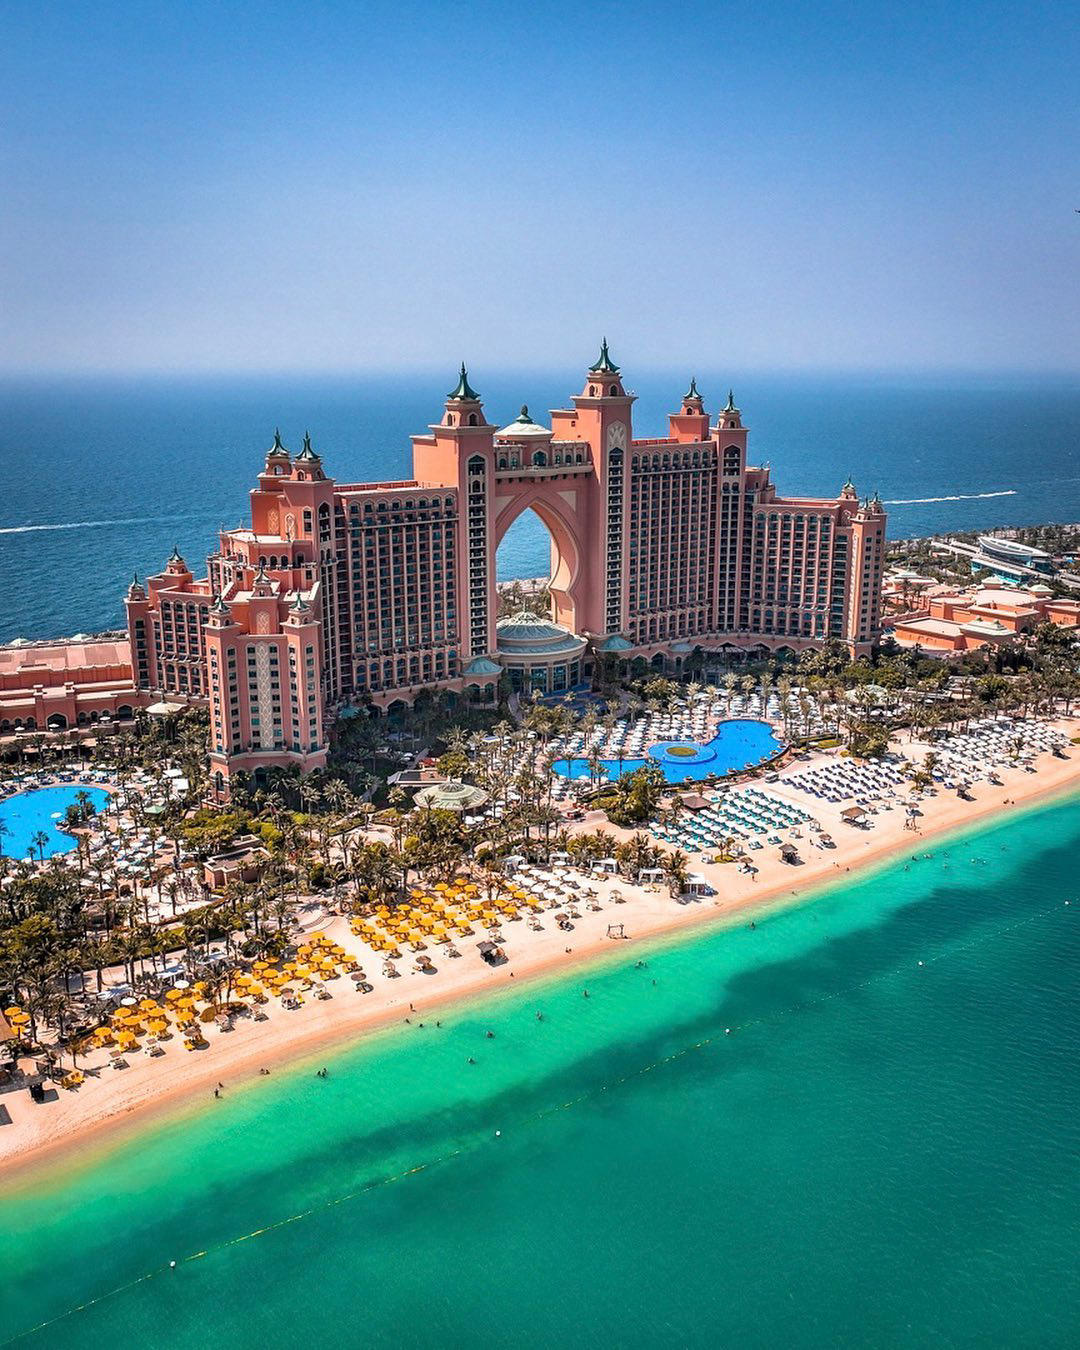 image  1 Atlantis The Palm, Dubai - Welcome to the ultimate holiday destination where you can make memories t